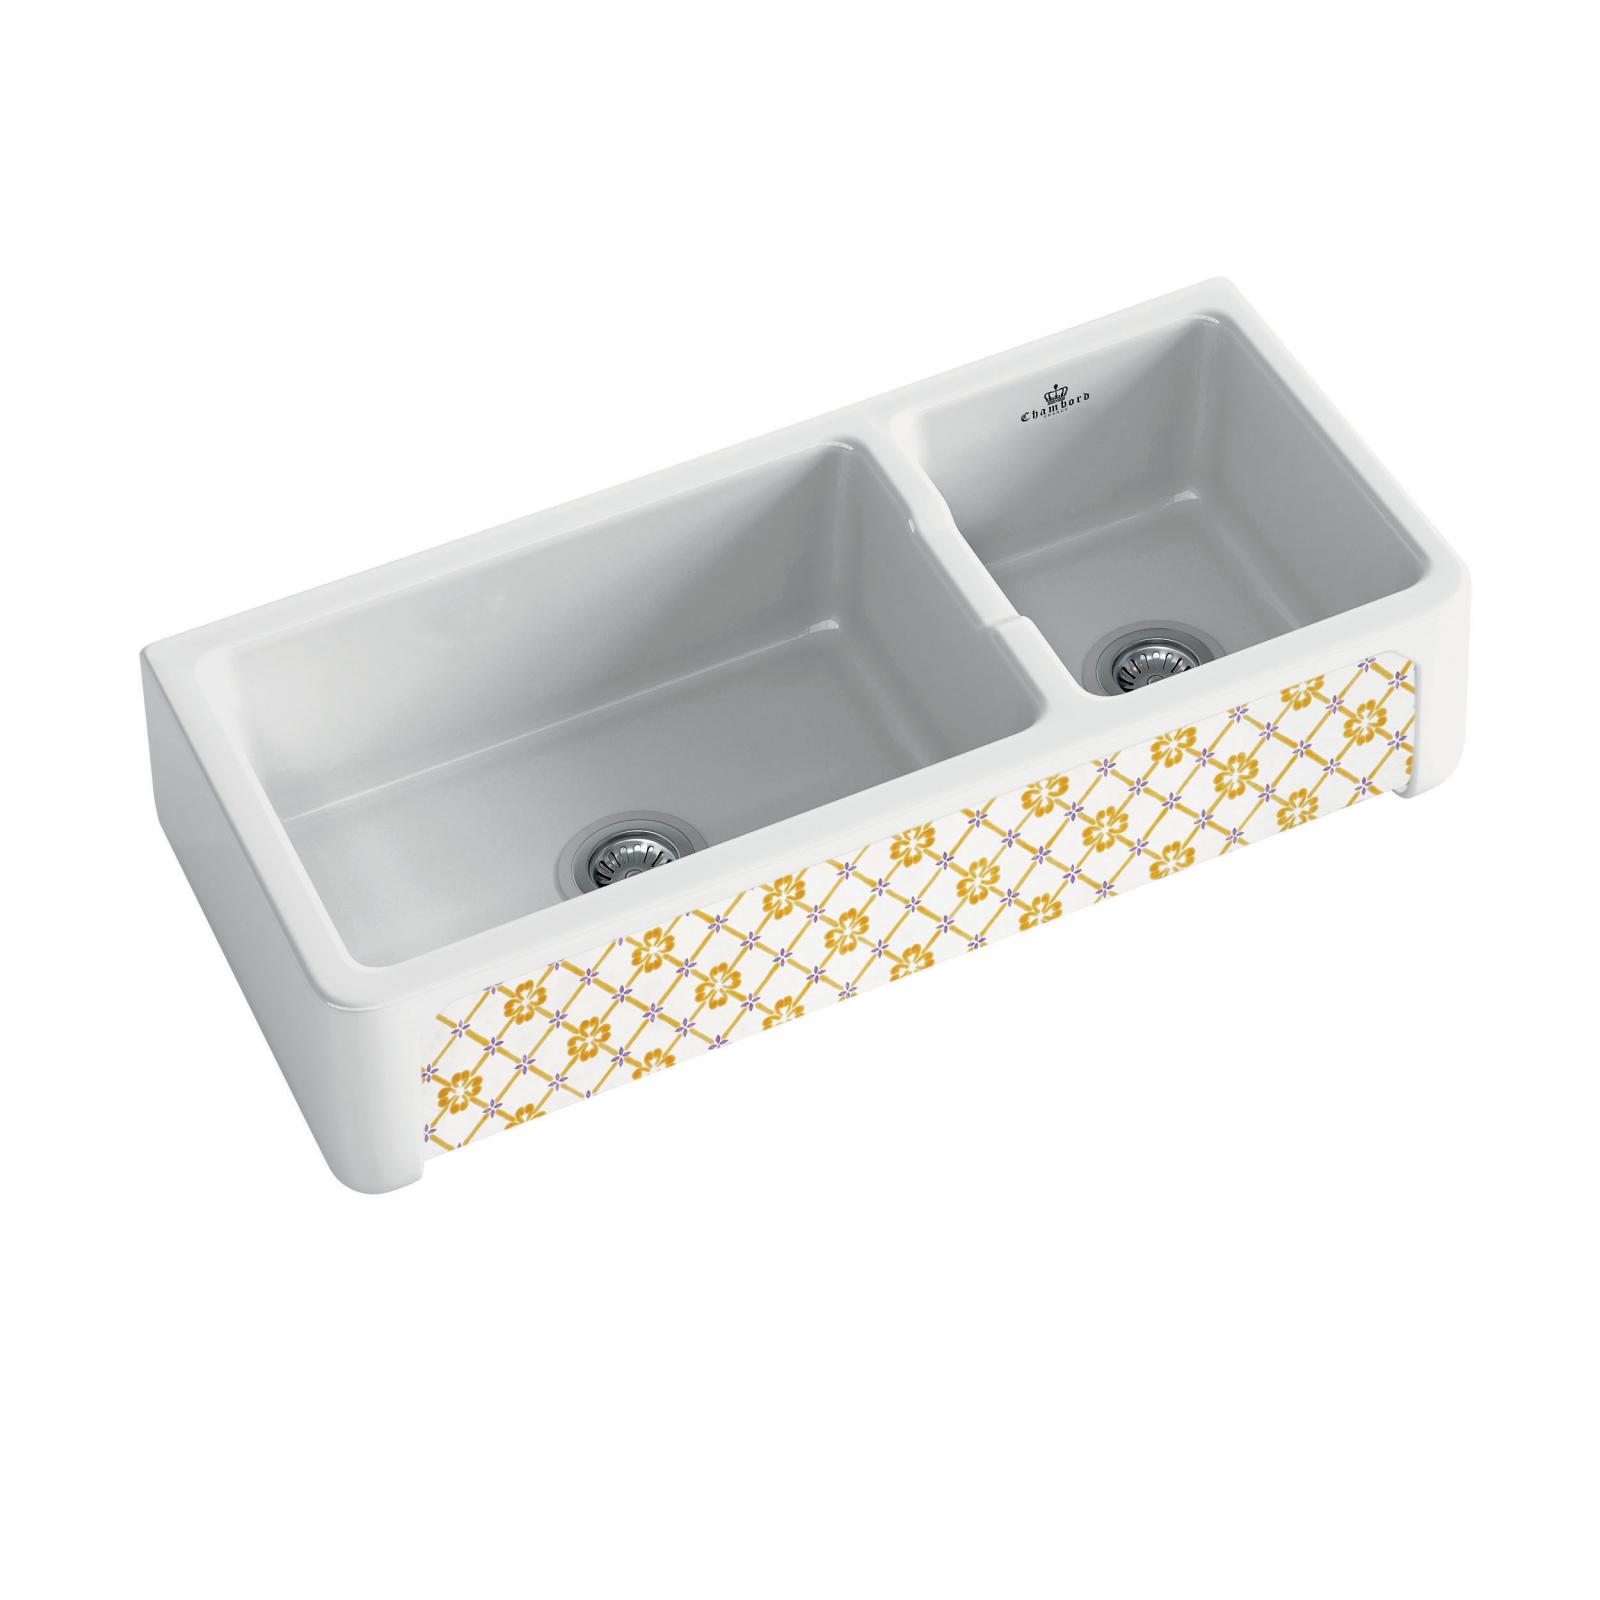 High-quality sink Henri III Provence - one and a half bowl, decorated ceramic ambience